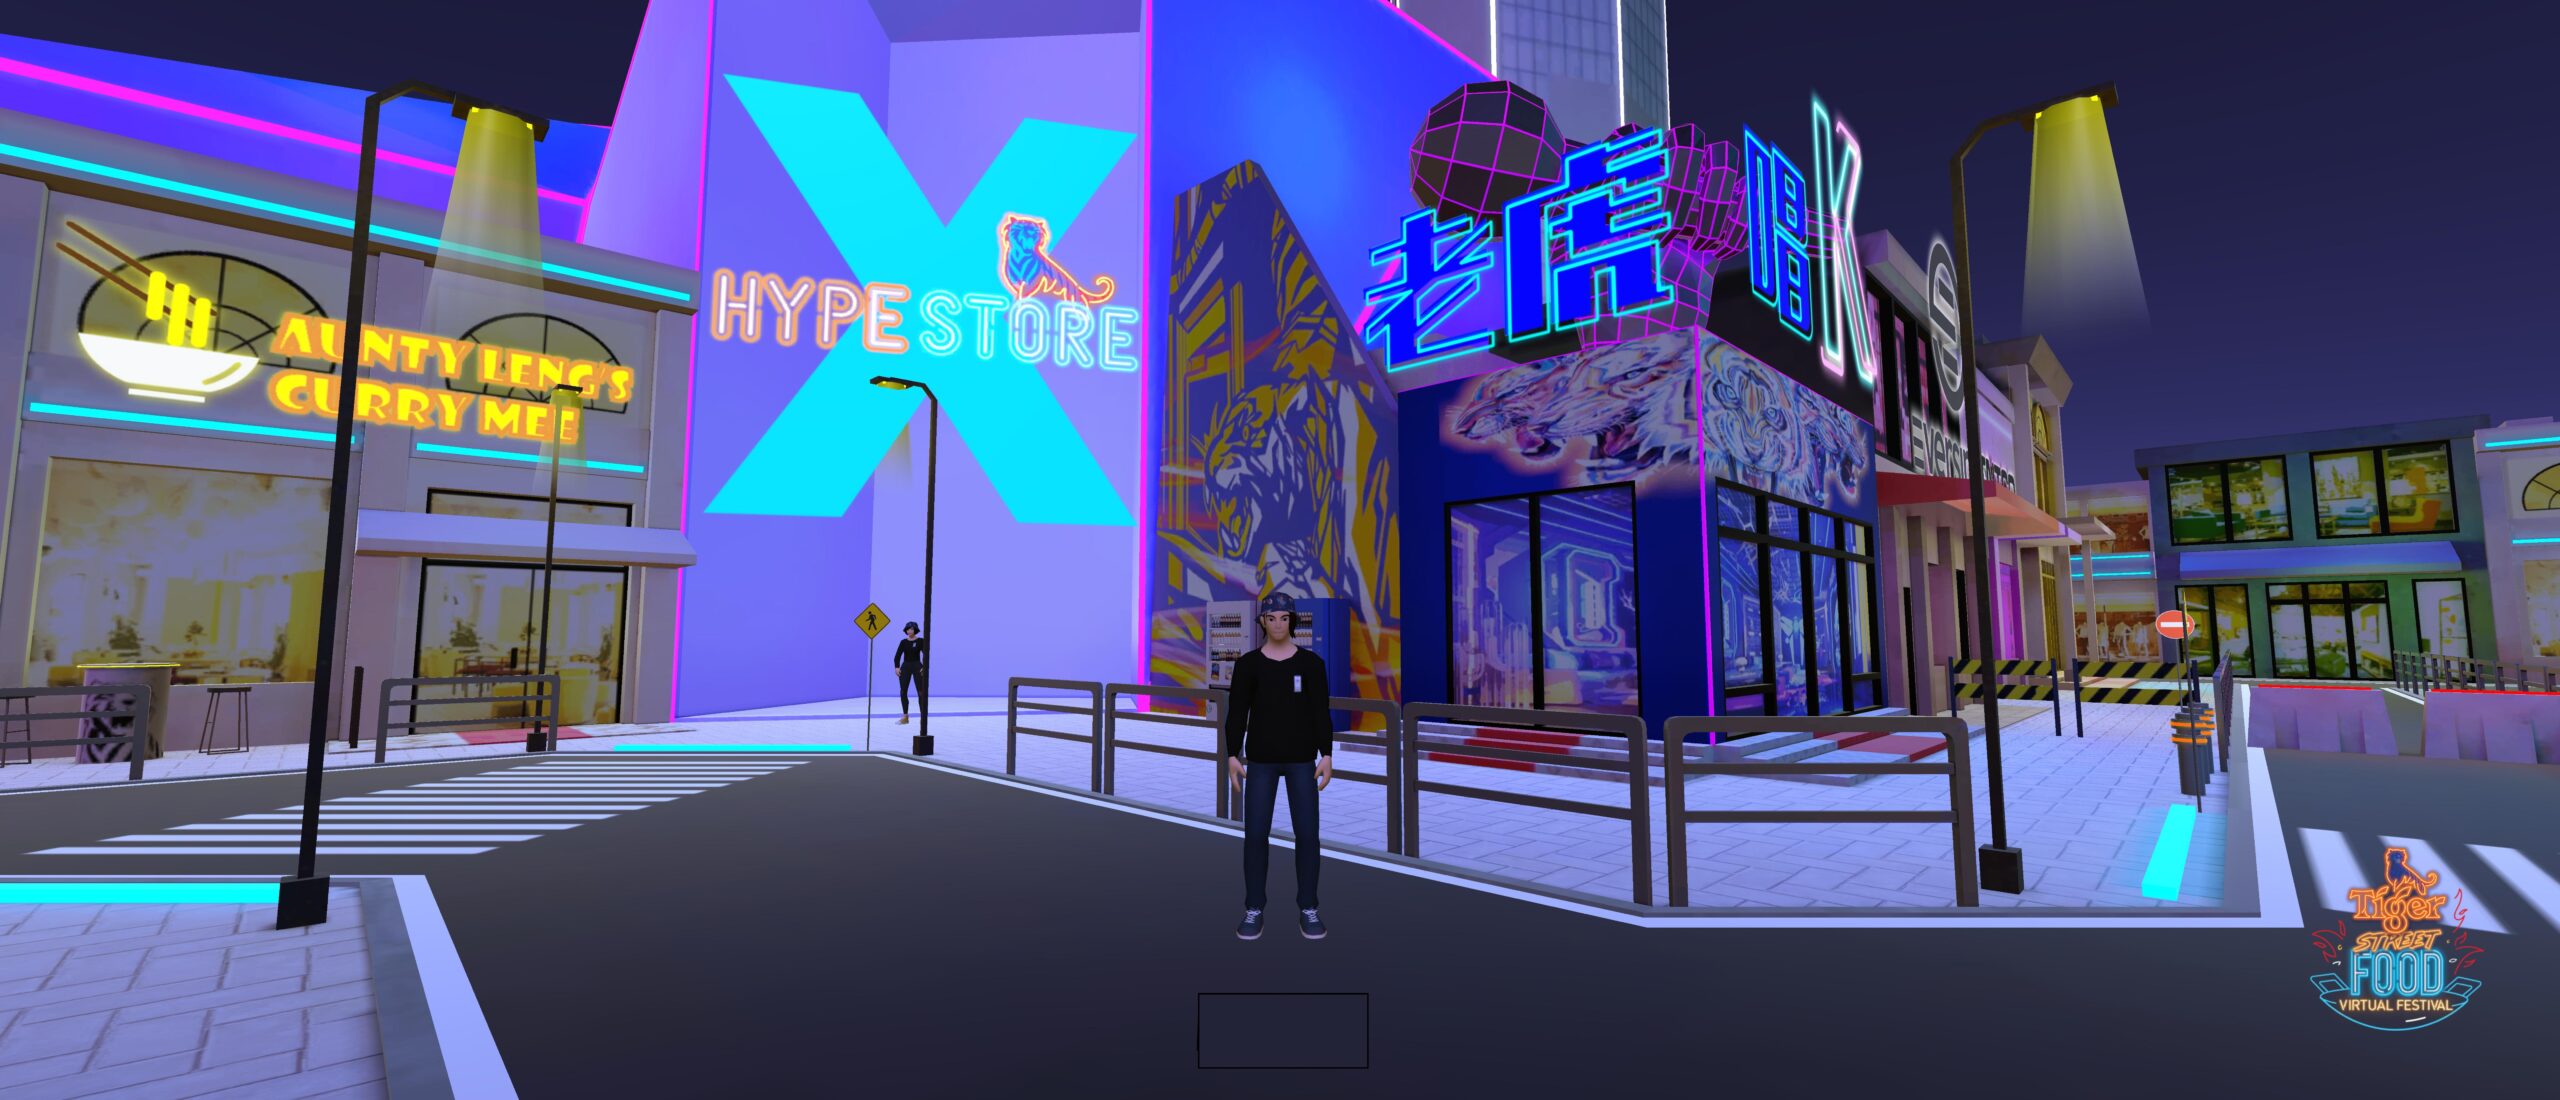 The Street Hype Store 1 scaled